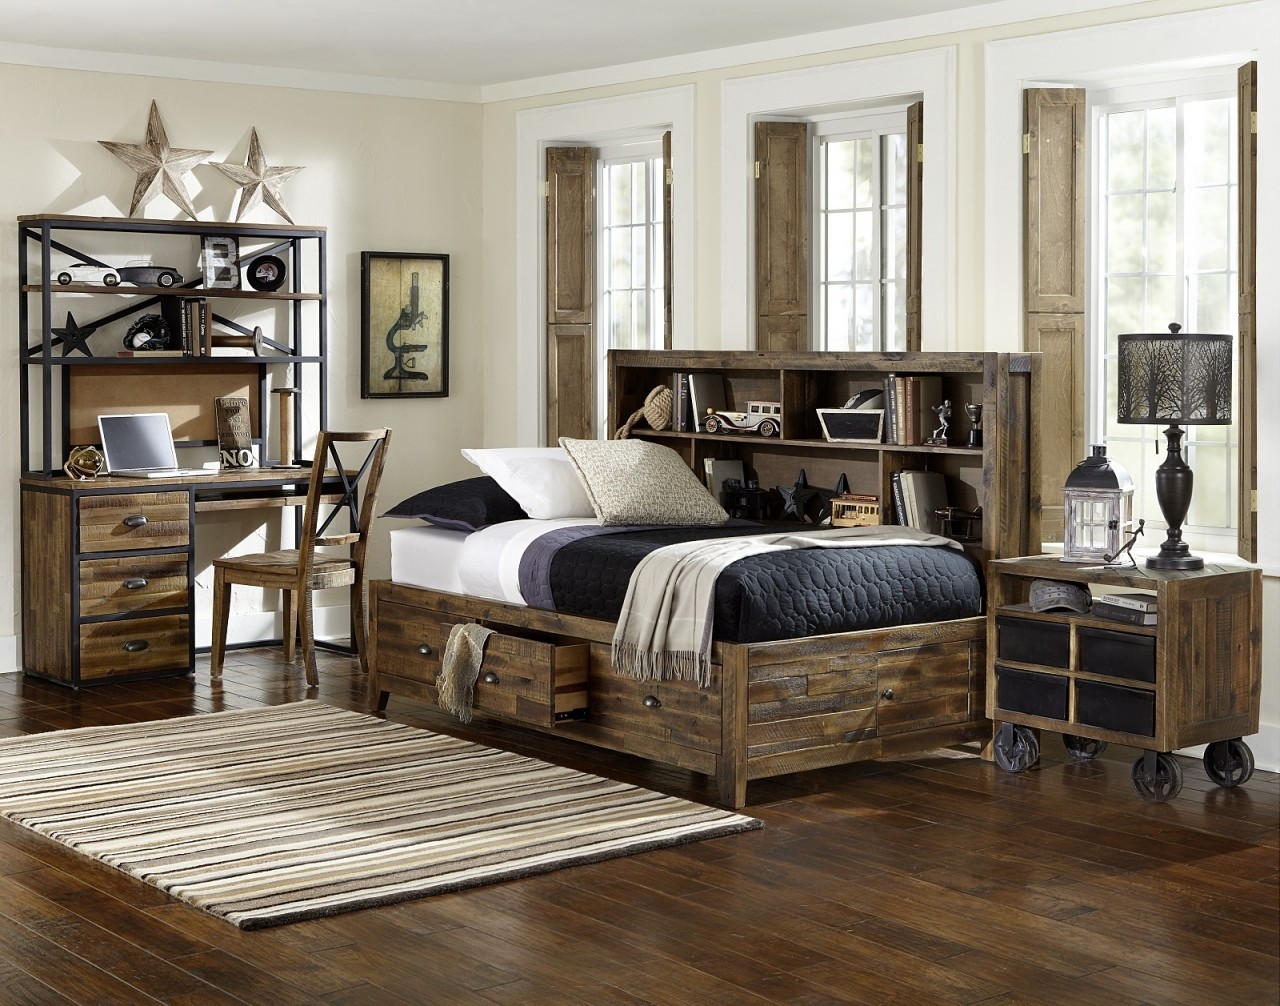 Beautiful distressed bedroom furniture for vintage flair